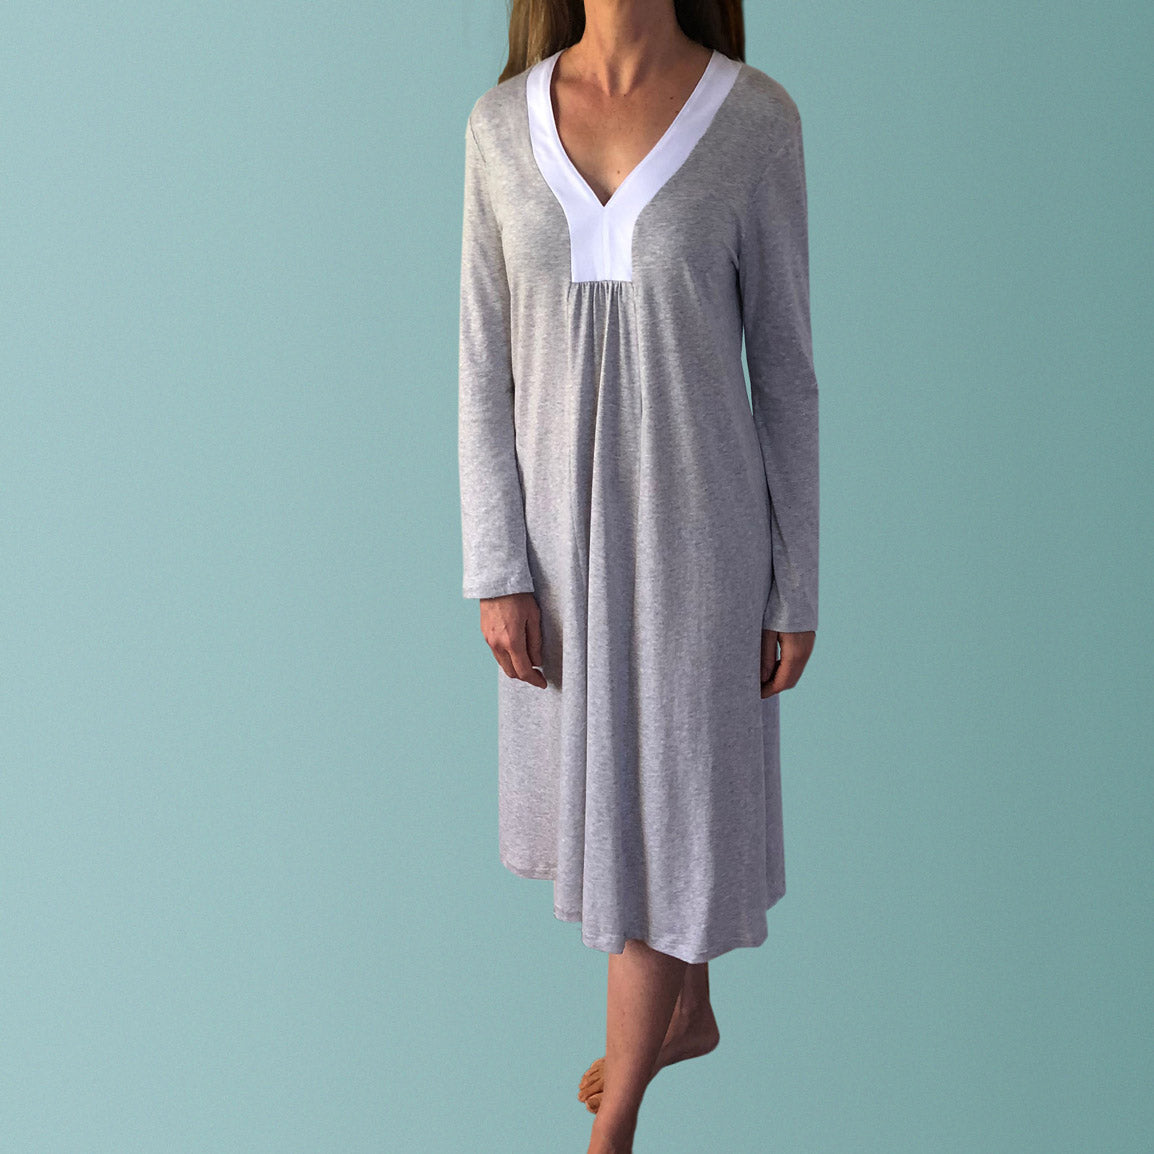 Australian made organic cotton clothing. Organic cotton winter nightie with long sleeves and v-neck. Plus size cotton nightie.